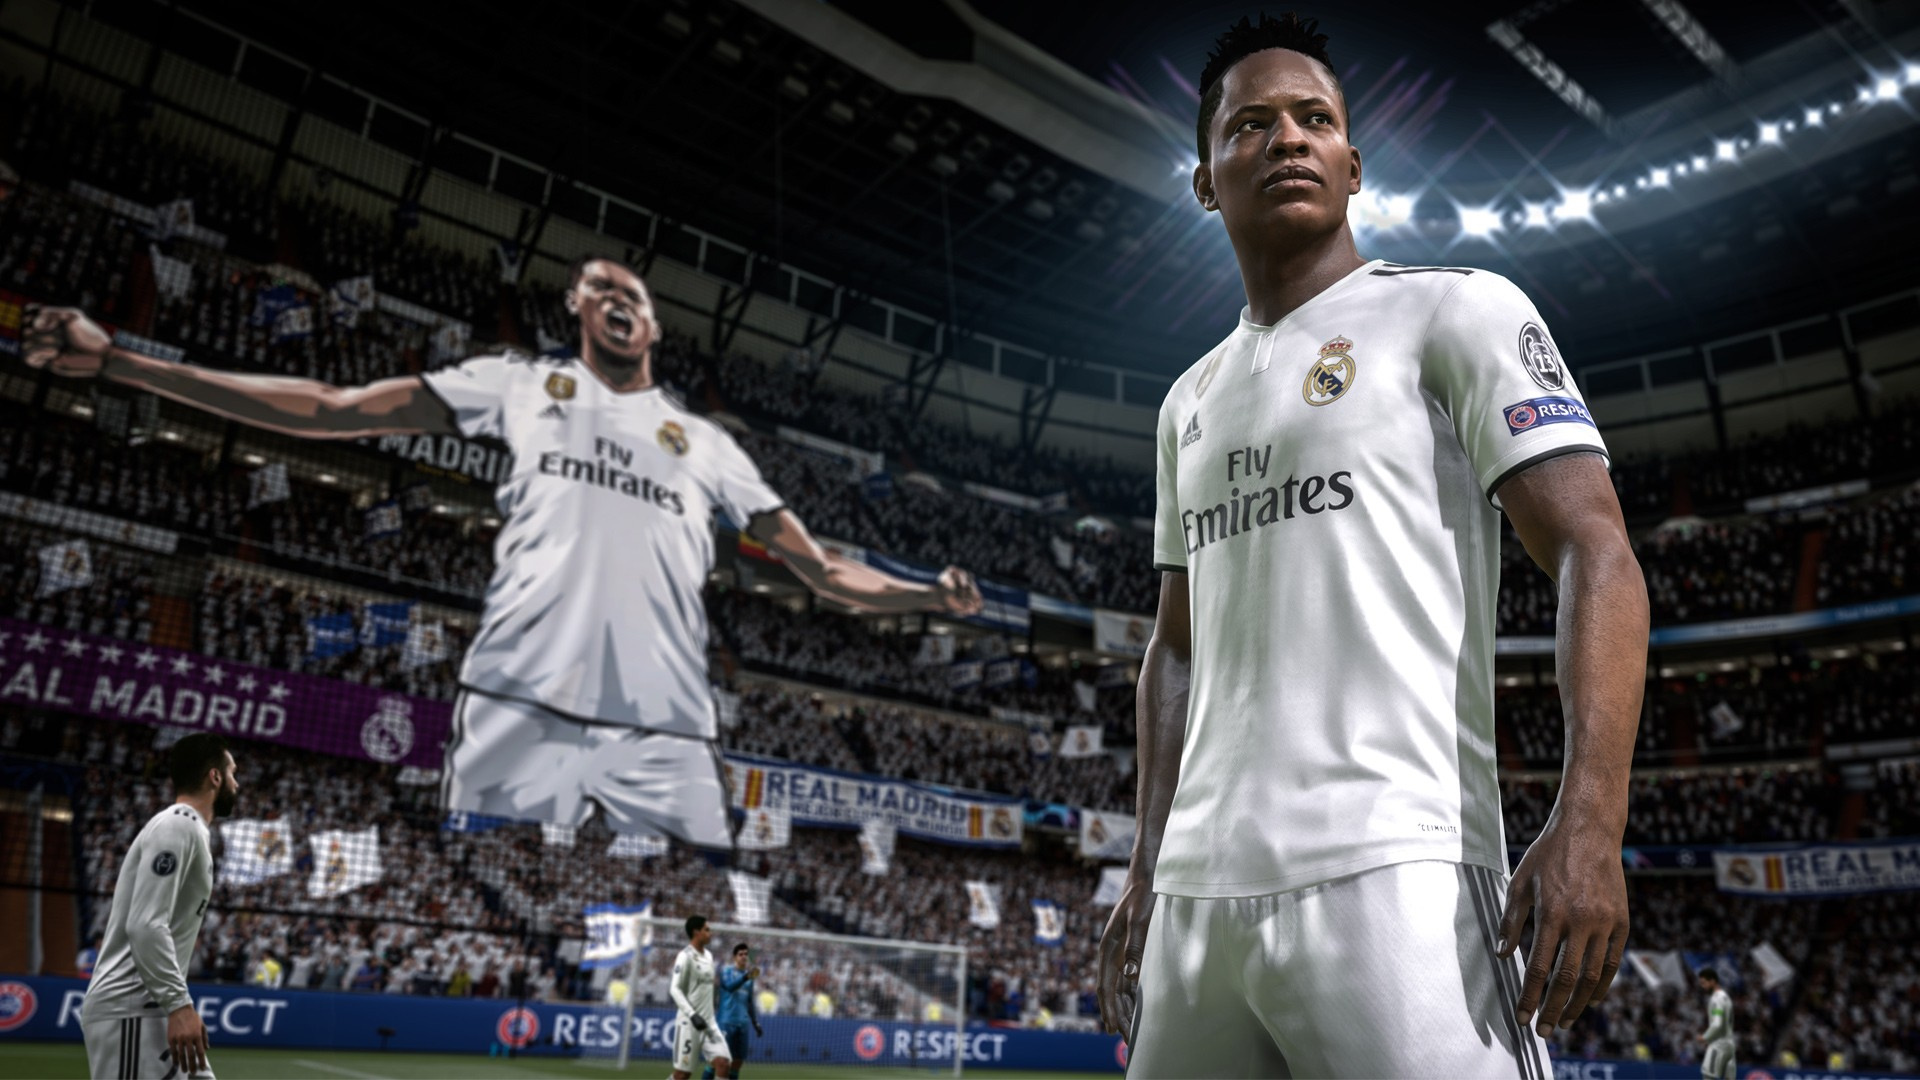 FIFA 22 GAMEPLAY OLD GEN (PS4/PC/XONE) - MANCHESTER CITY X REAL MADRID -  VALE A PENA COMPRAR? 